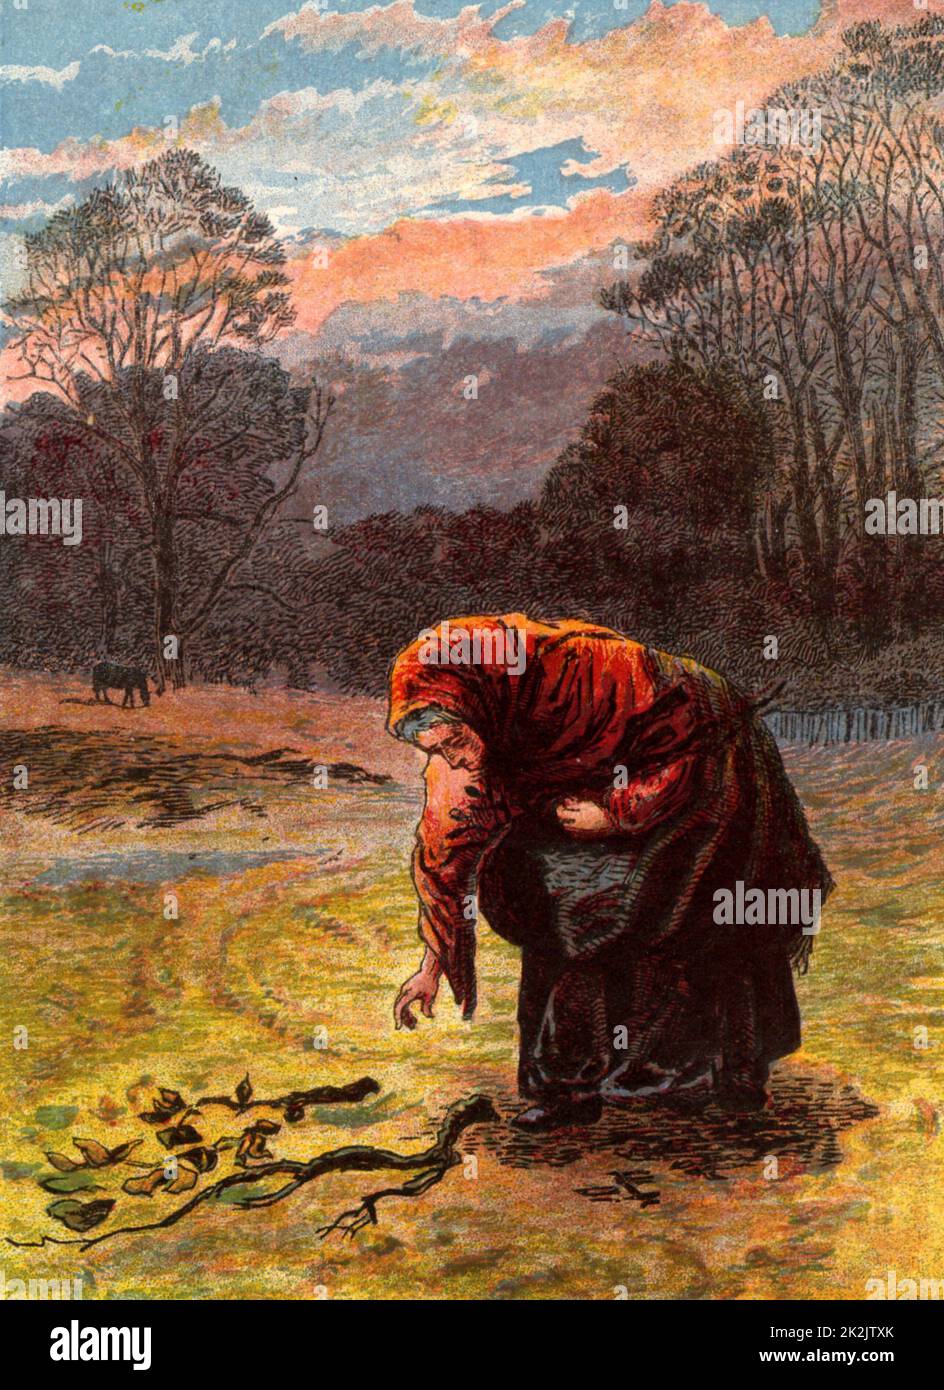 An old woman in a shawl bending stiffly to collect firewood. Kronheim chromolithograph from 'Pictures from Nature' by Mary Howitt (London, 1869). Stock Photo